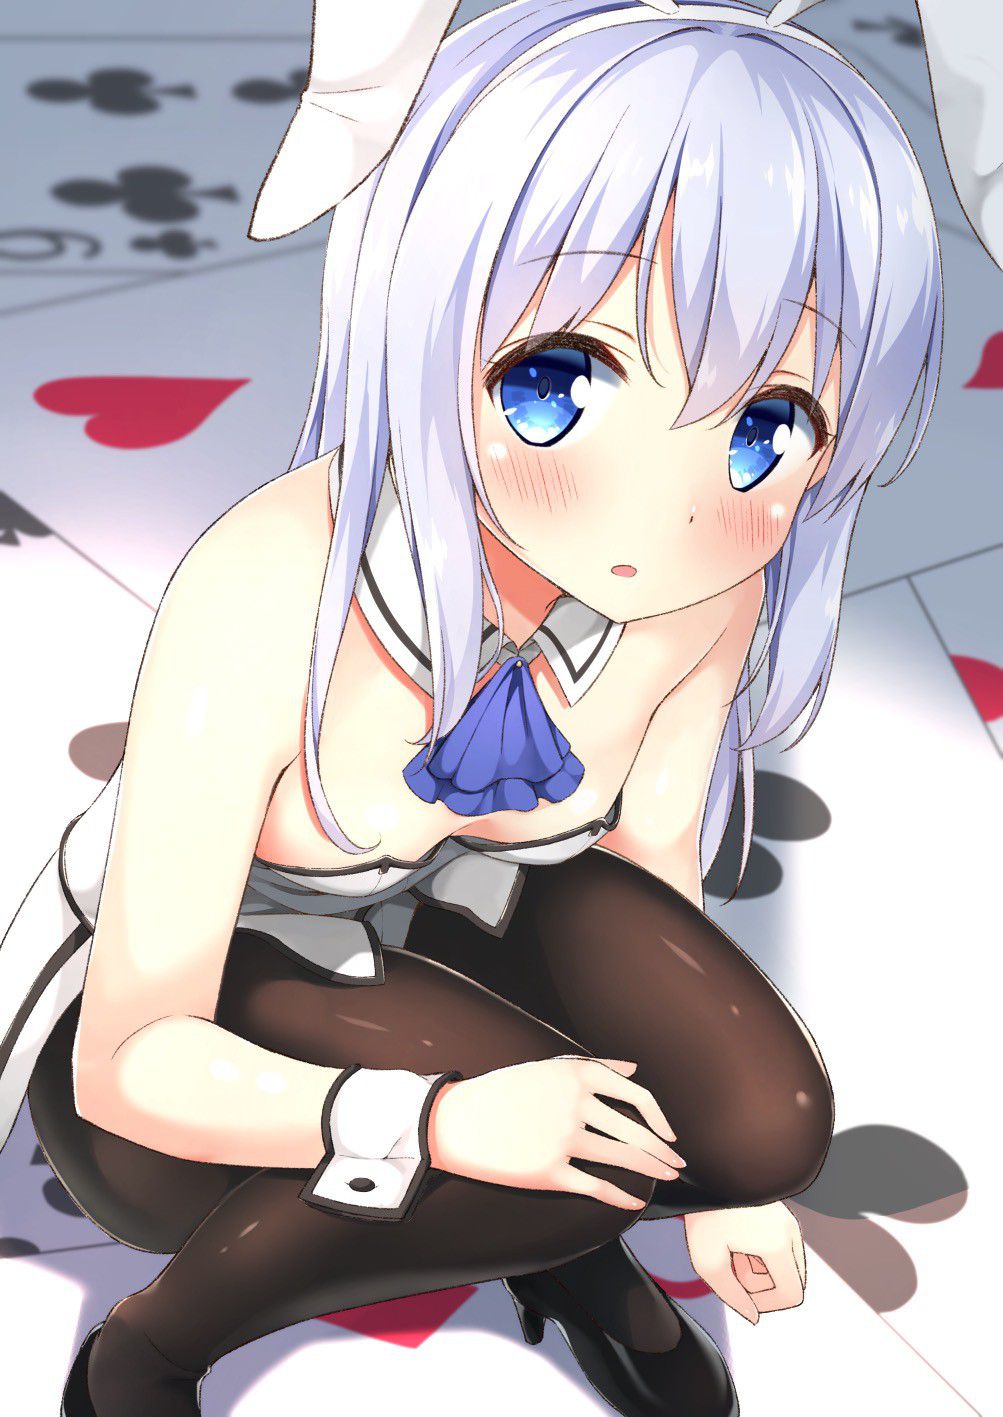 【Secondary erotic】 The secondary dosquebe image of a girl dressed in a bunny girl costume that stands out for the dosukebe of the buttocks and pie is here 14